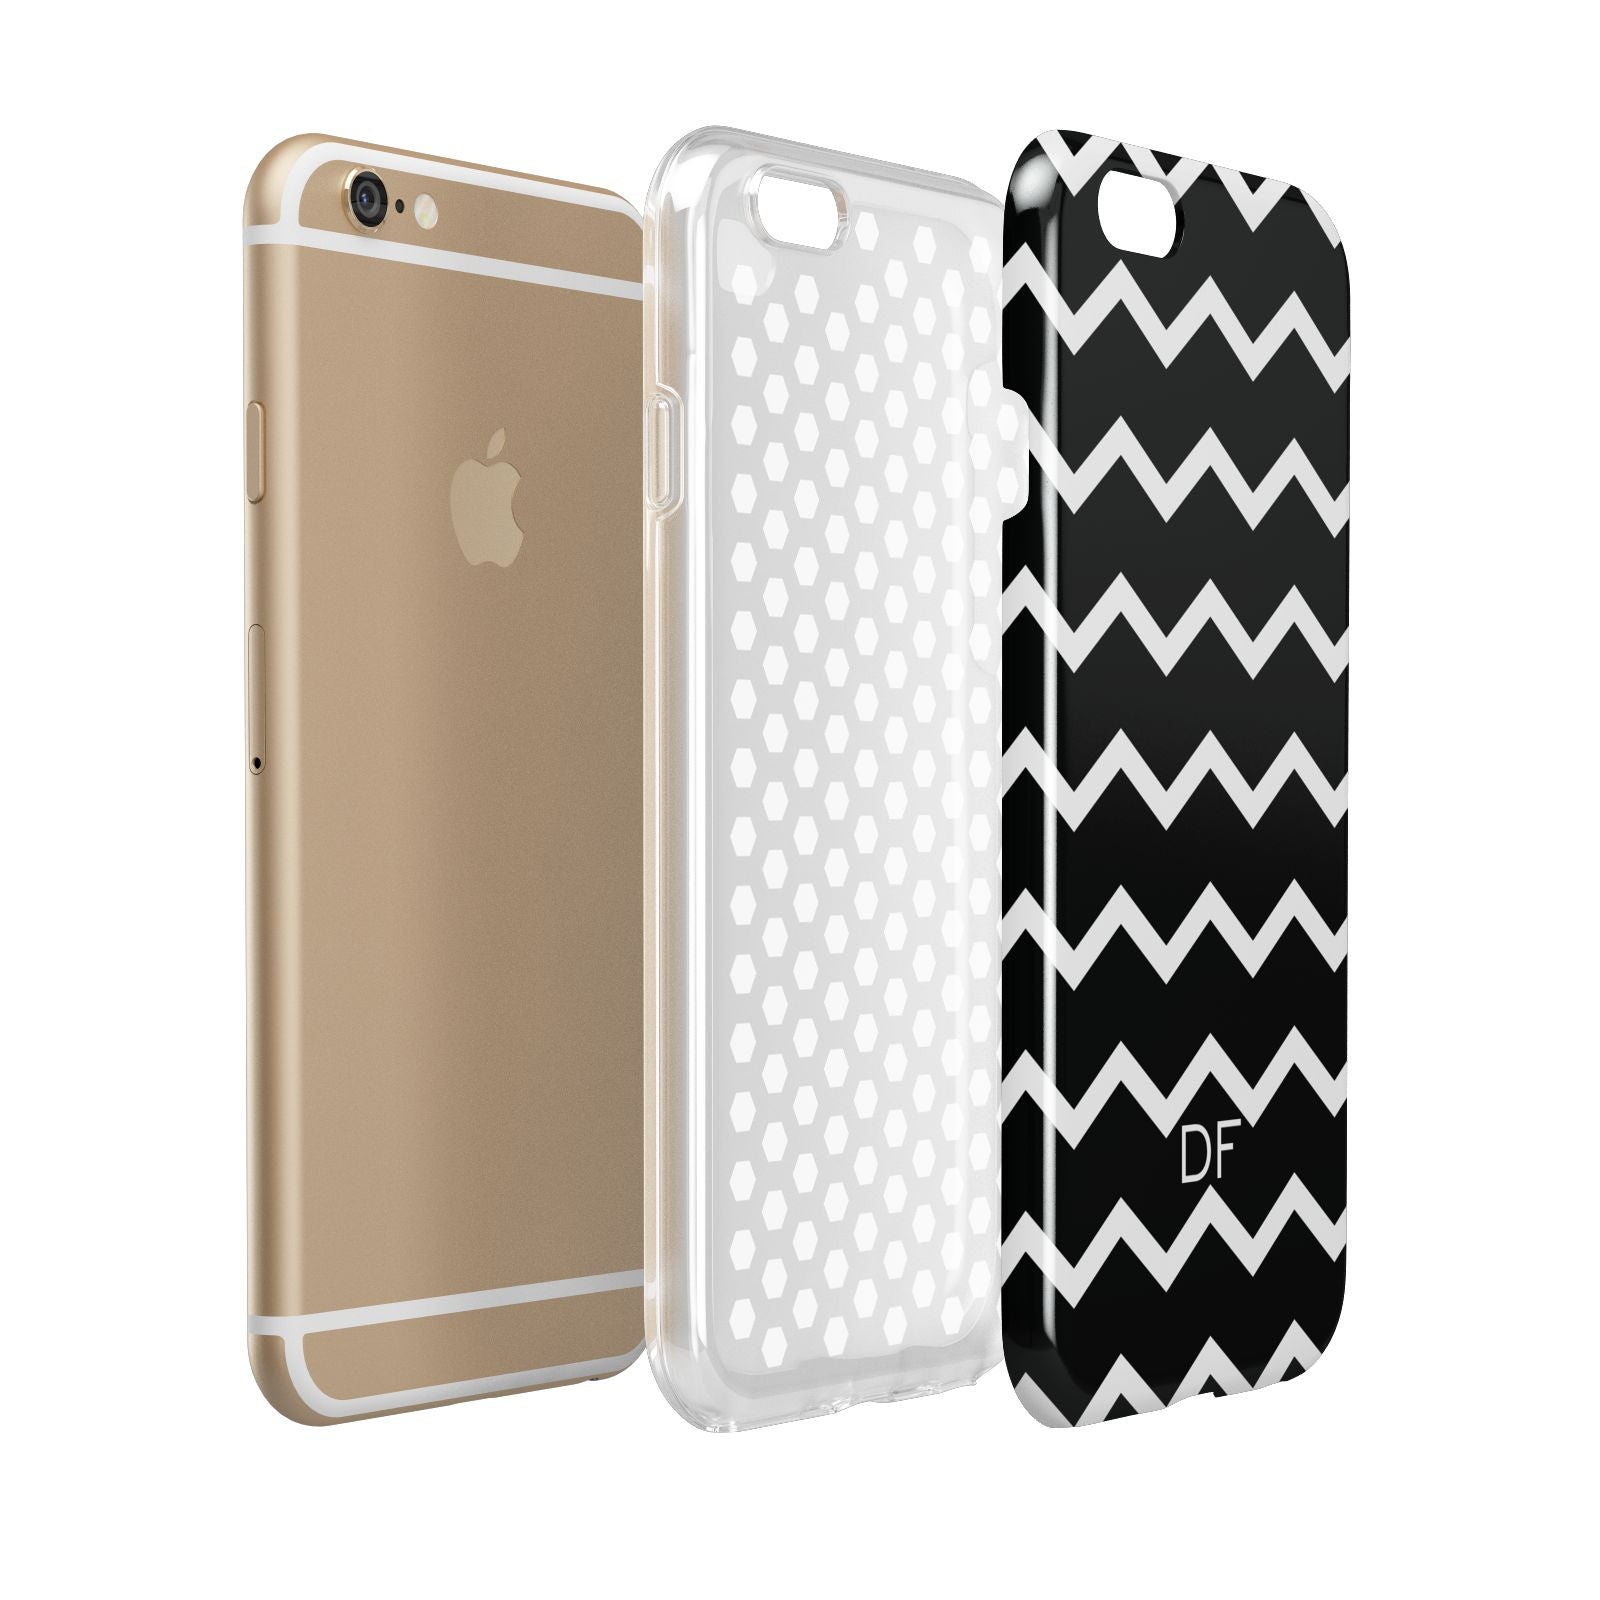 Personalised Chevron Black Apple iPhone 6 3D Tough Case Expanded view